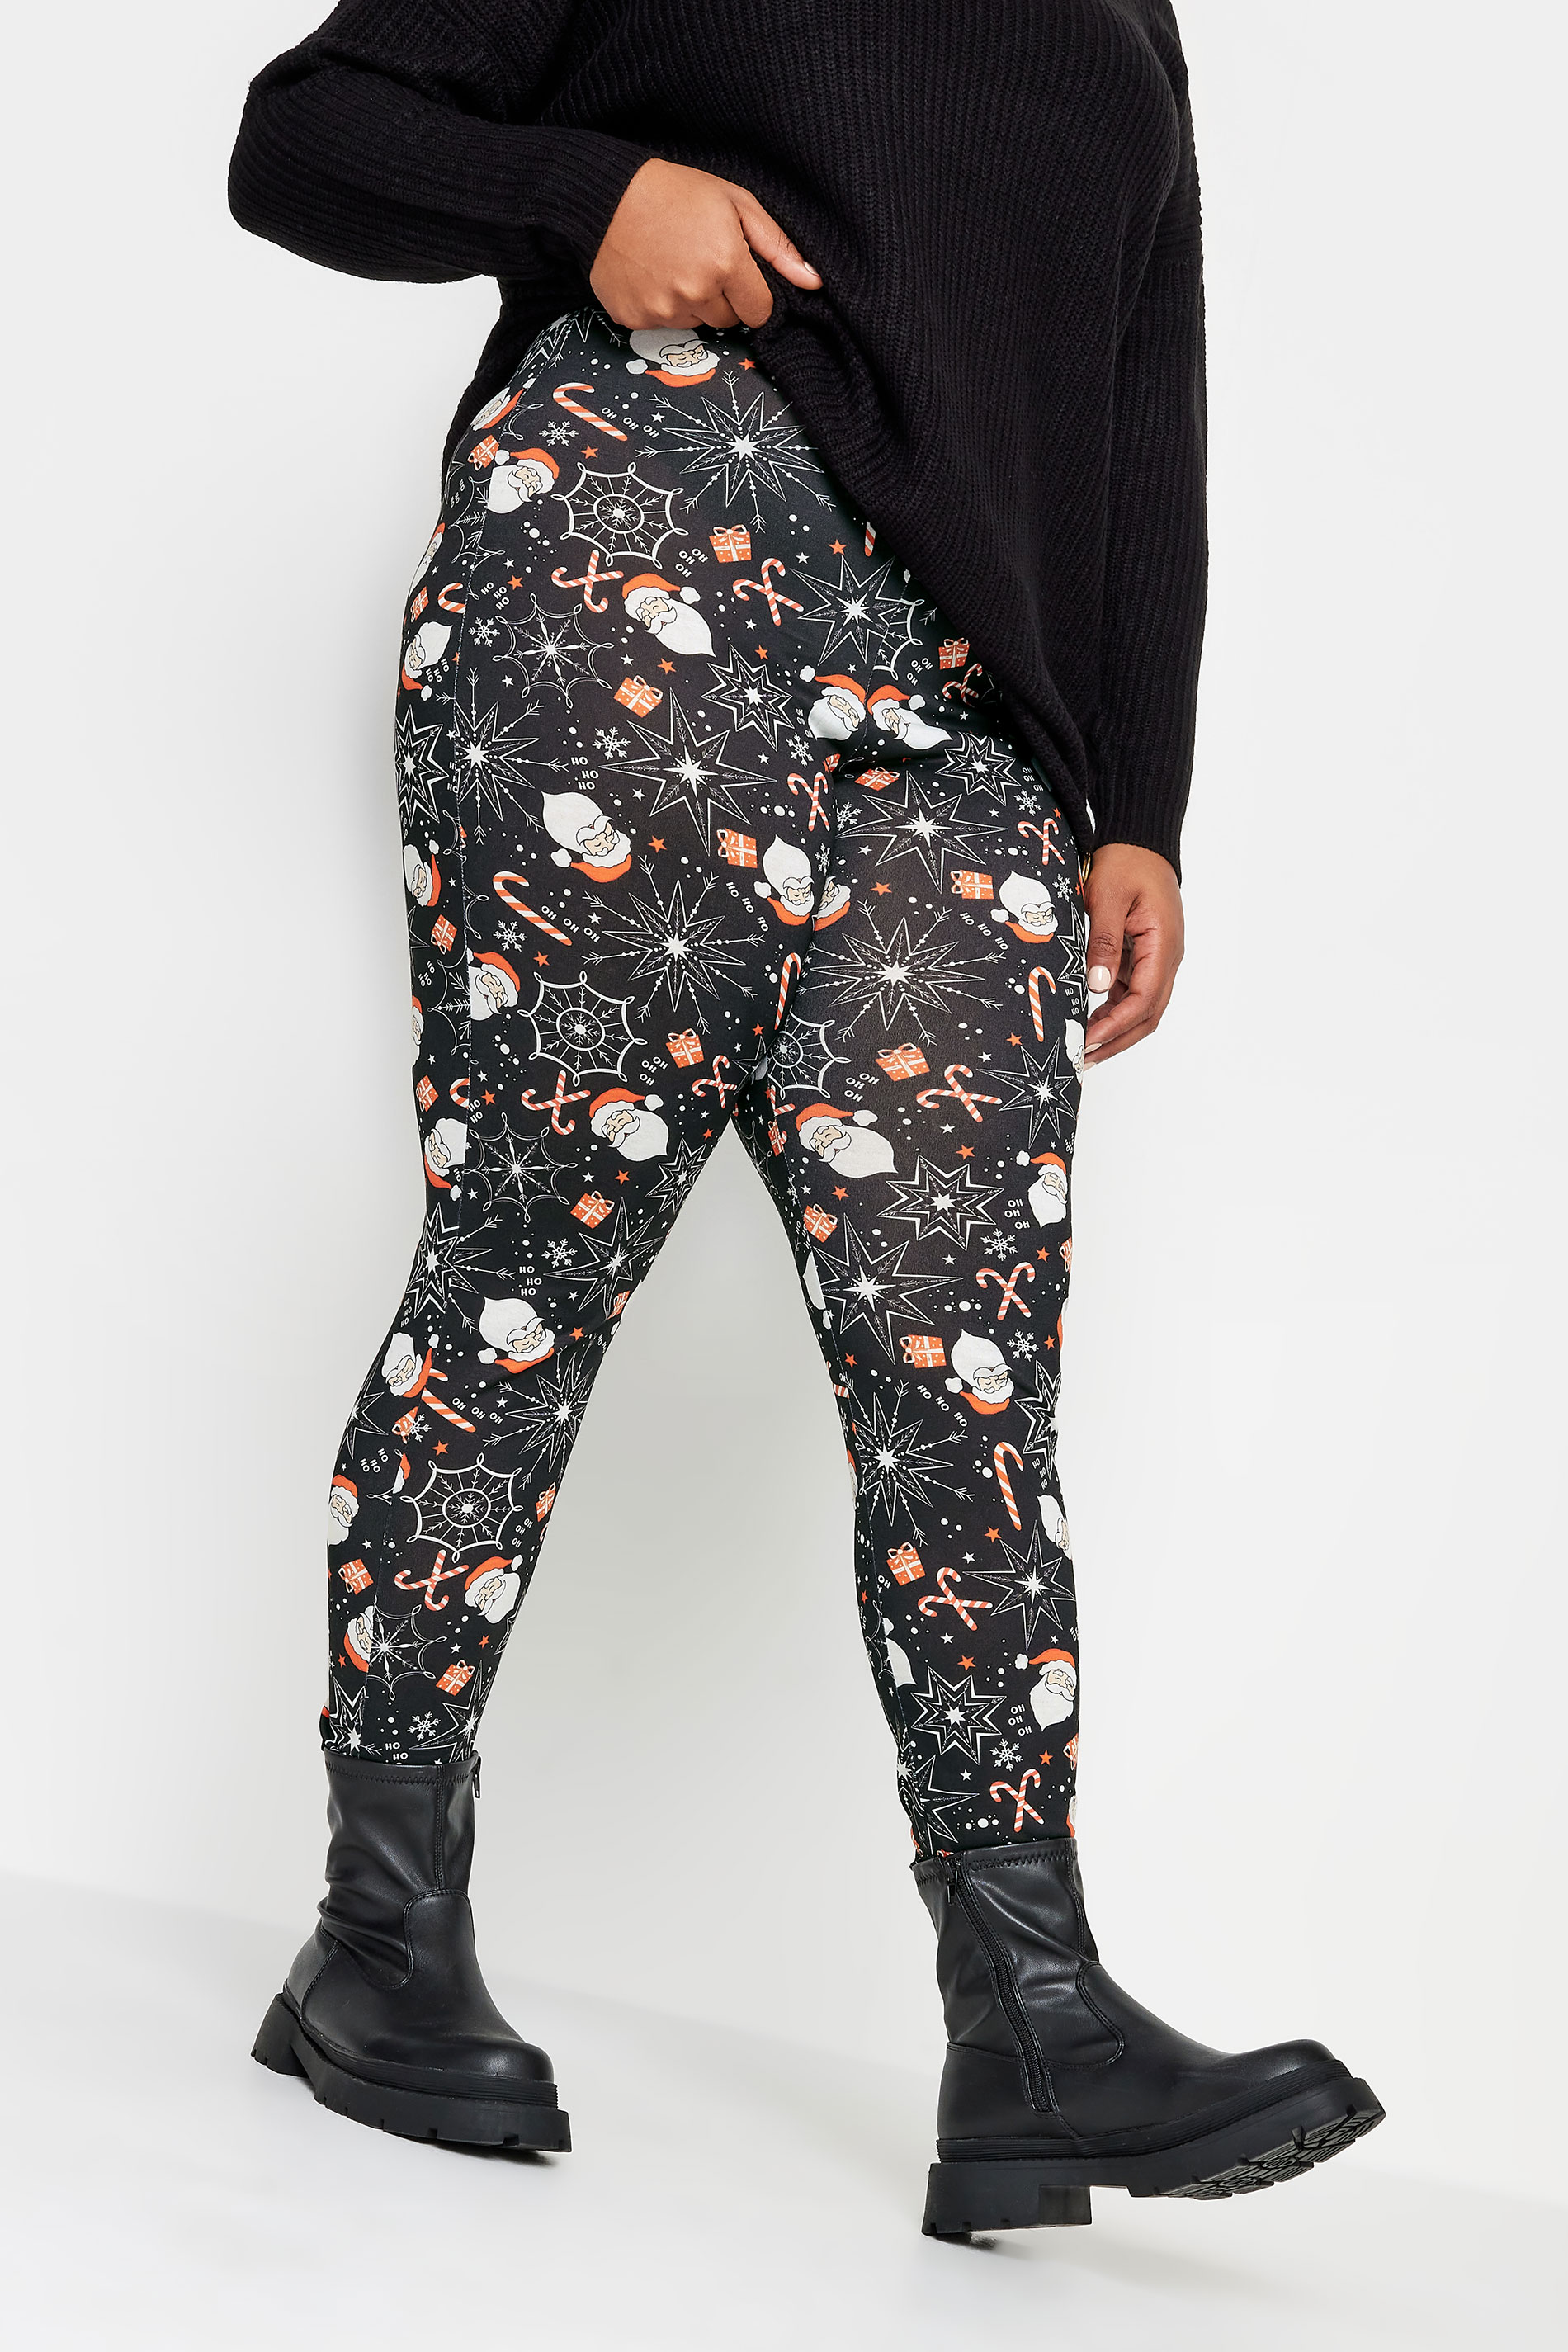 YOURS Plus Size Black Christmas Print Leggings | Yours Clothing 1